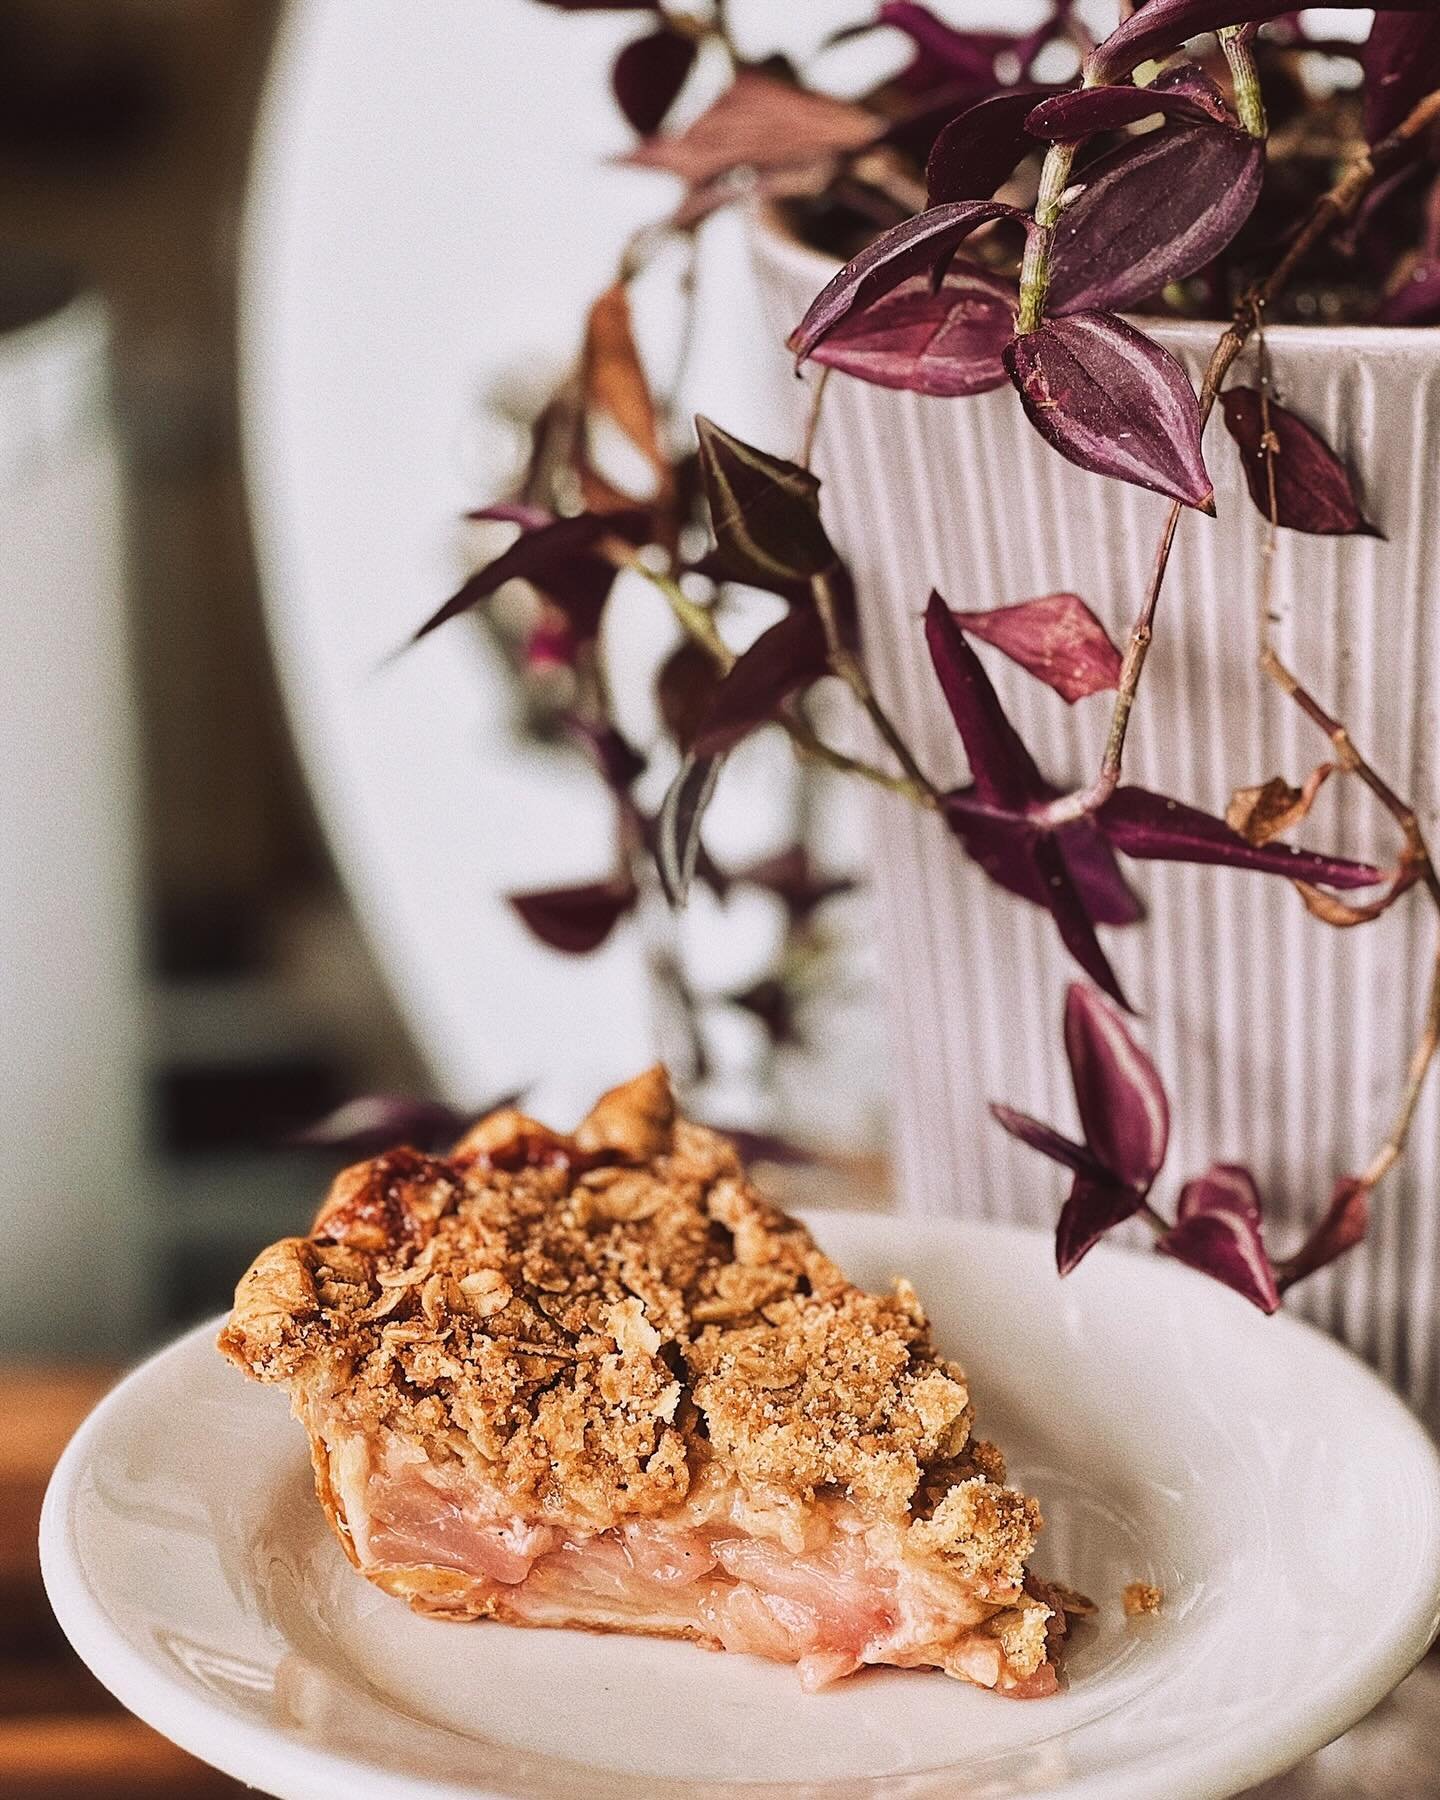 It&rsquo;s the last day for this sweet pie menu!! 🥧
&bull;
Come chase away the Sunday Scaries with a slice of Pear Cherry Cardamom Crumb! We&rsquo;ll be here 8-6 with all the tasty treats and espresso drinks you need!
📷 @emmacolwellphoto